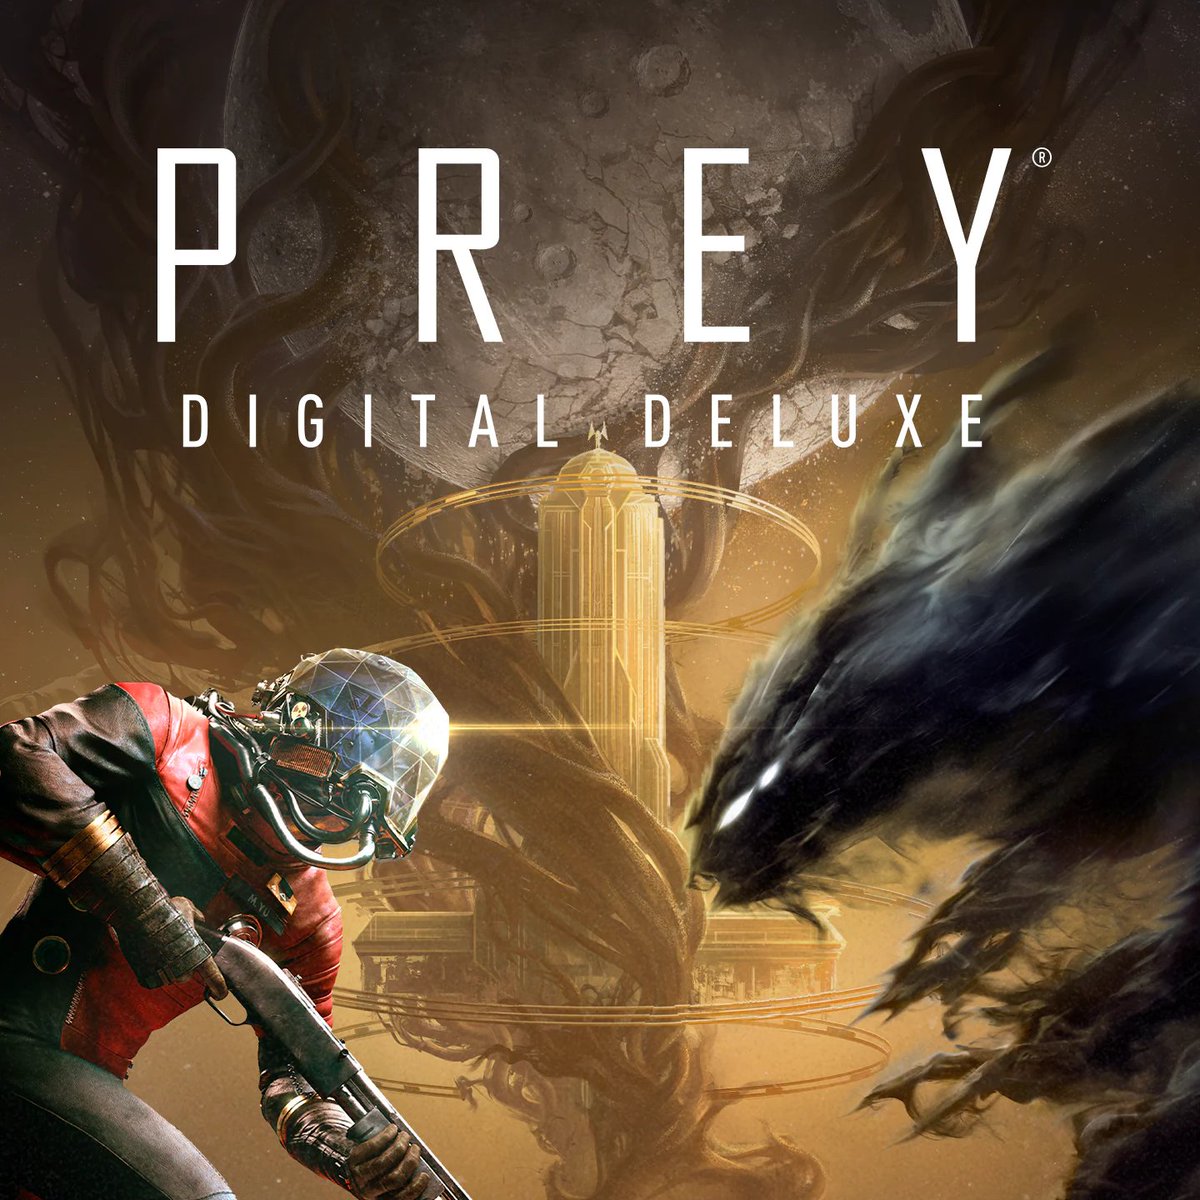 #FTKGiveaway: 1 x Prey Digital Deluxe Steam Key
Retweet and Follow @FTKGames to enter

A winner will be picked in 12 hours, good luck!
Leave suggestions for a weekend giveaway 👇